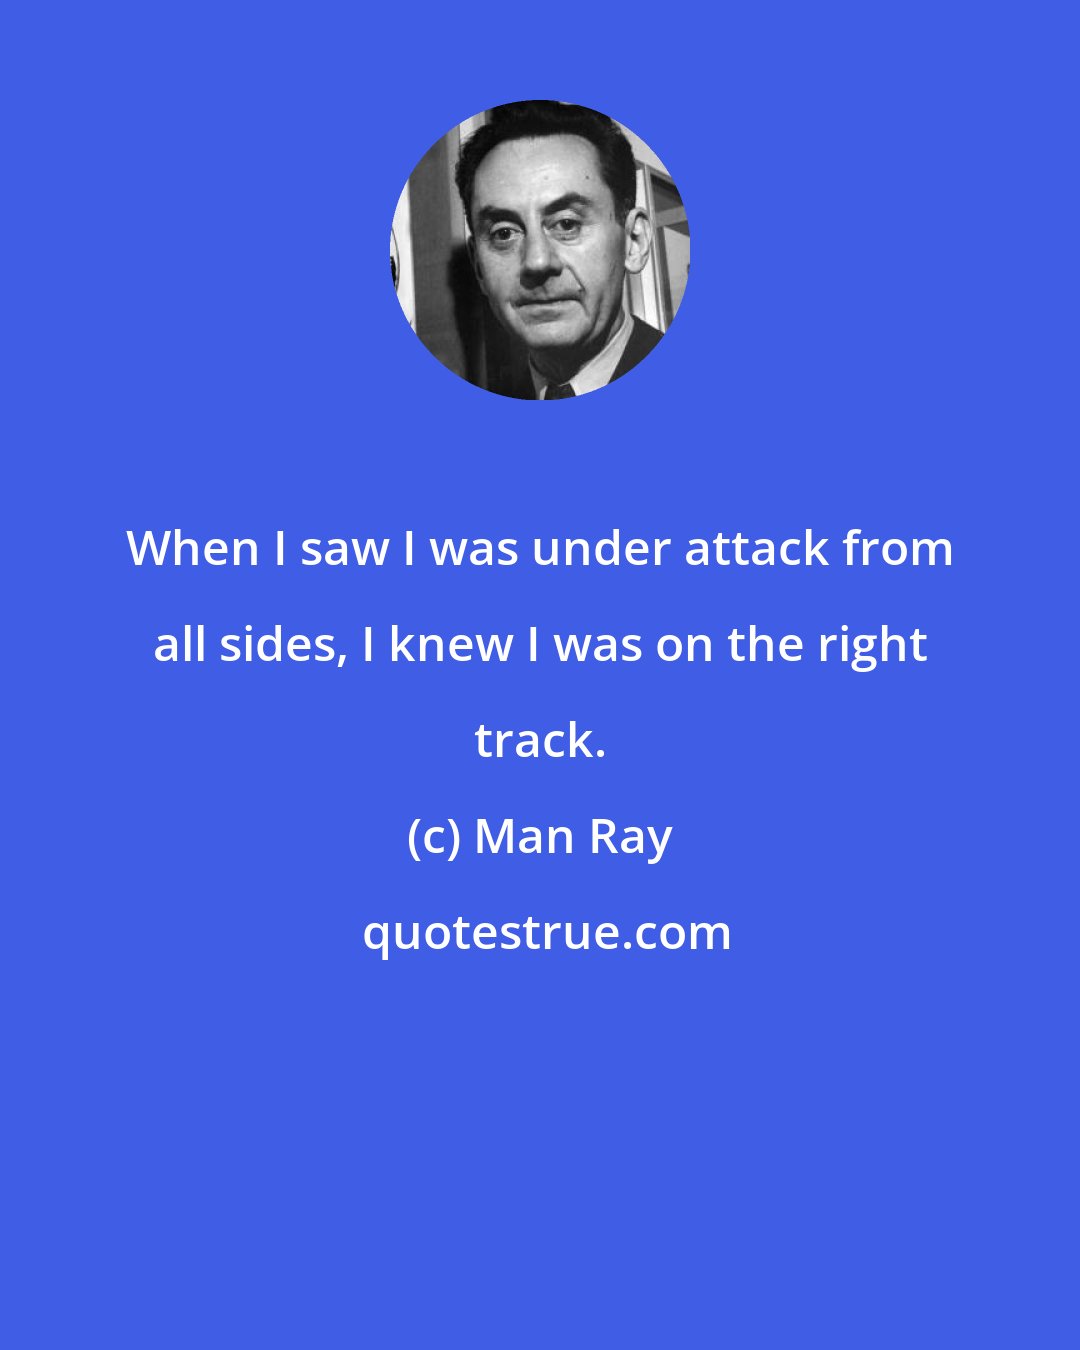 Man Ray: When I saw I was under attack from all sides, I knew I was on the right track.